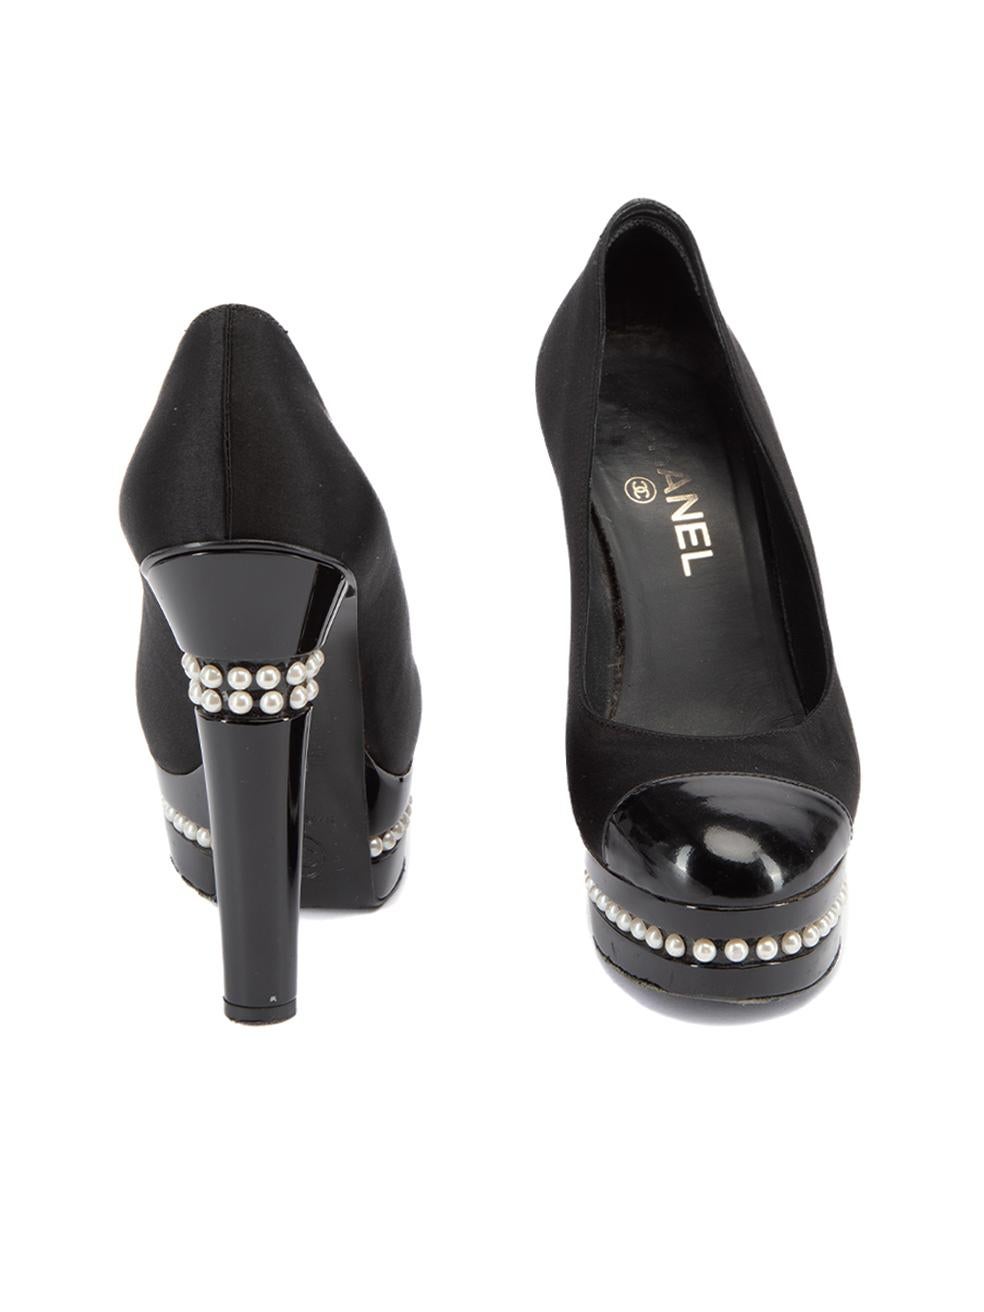 Chanel Women's Black Cap Toe Pearl Accent Platform Heels In Excellent Condition For Sale In London, GB